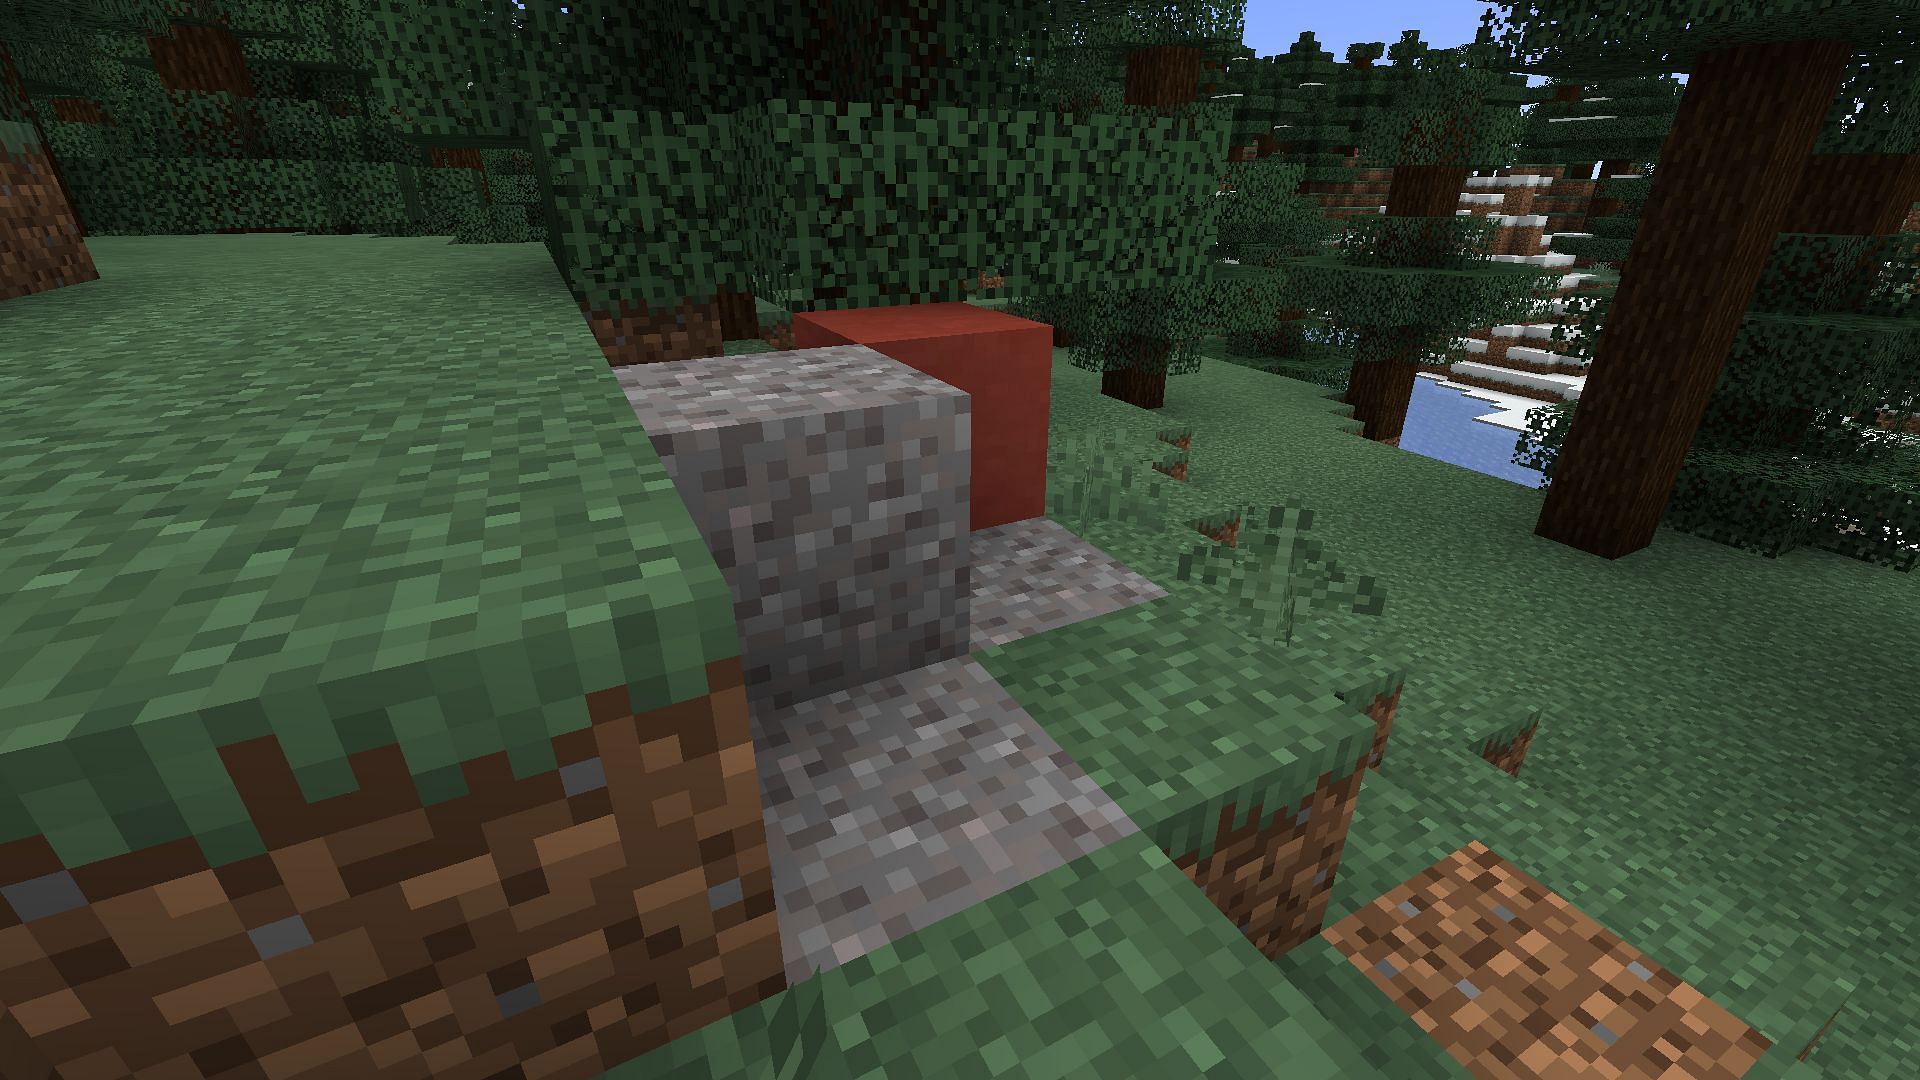 Trail ruins abound in this Minecraft Java seed (Image via Mojang)